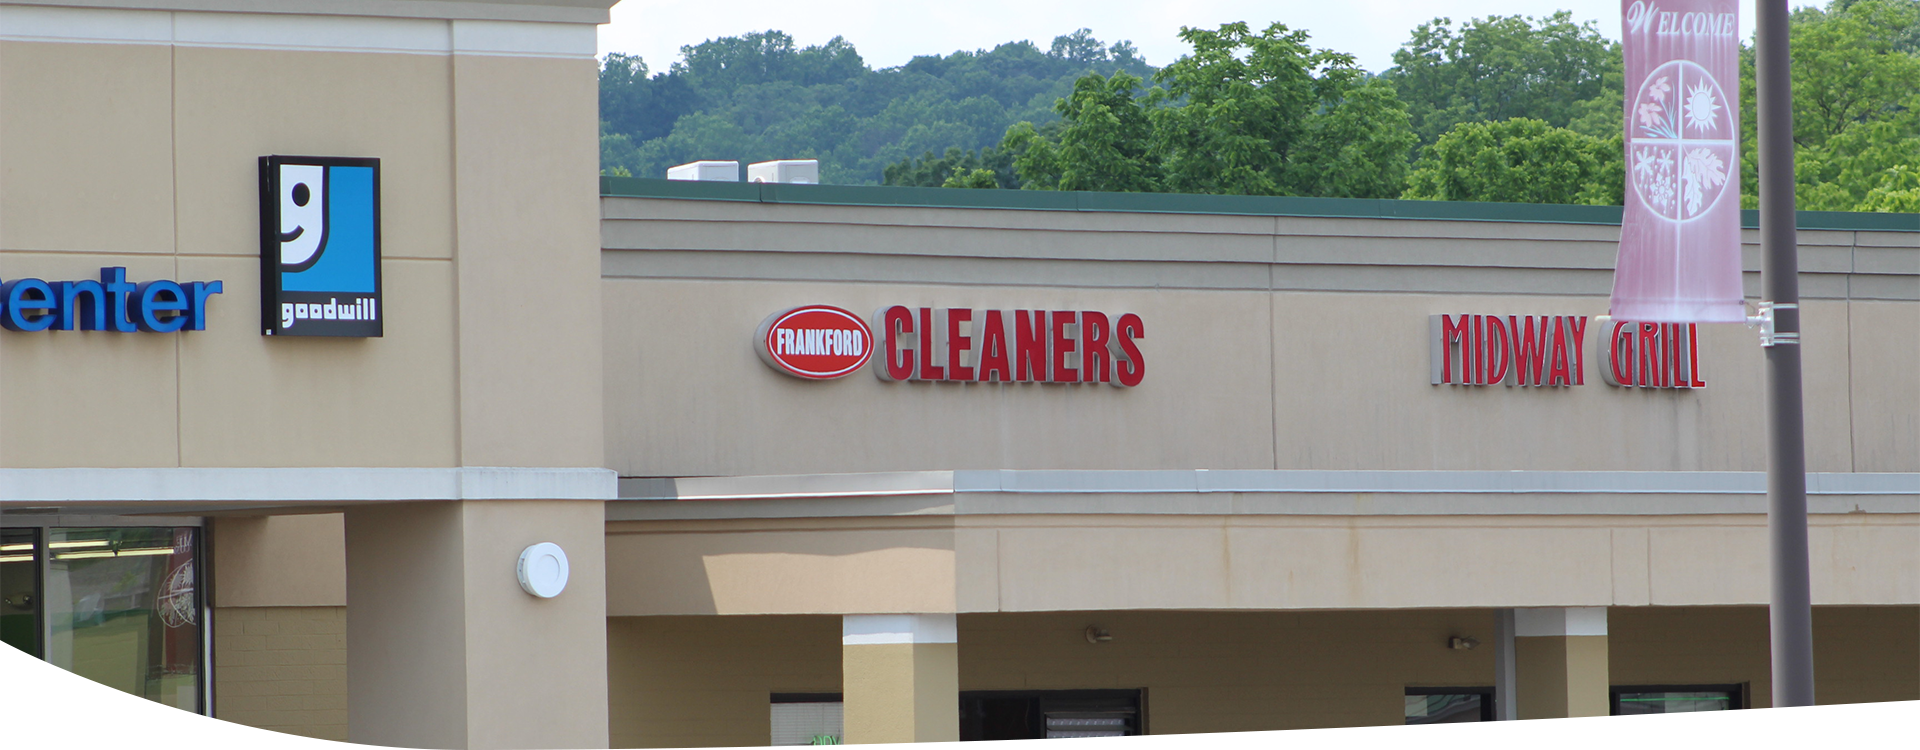 Frankford Cleaners in Thorndale, PA